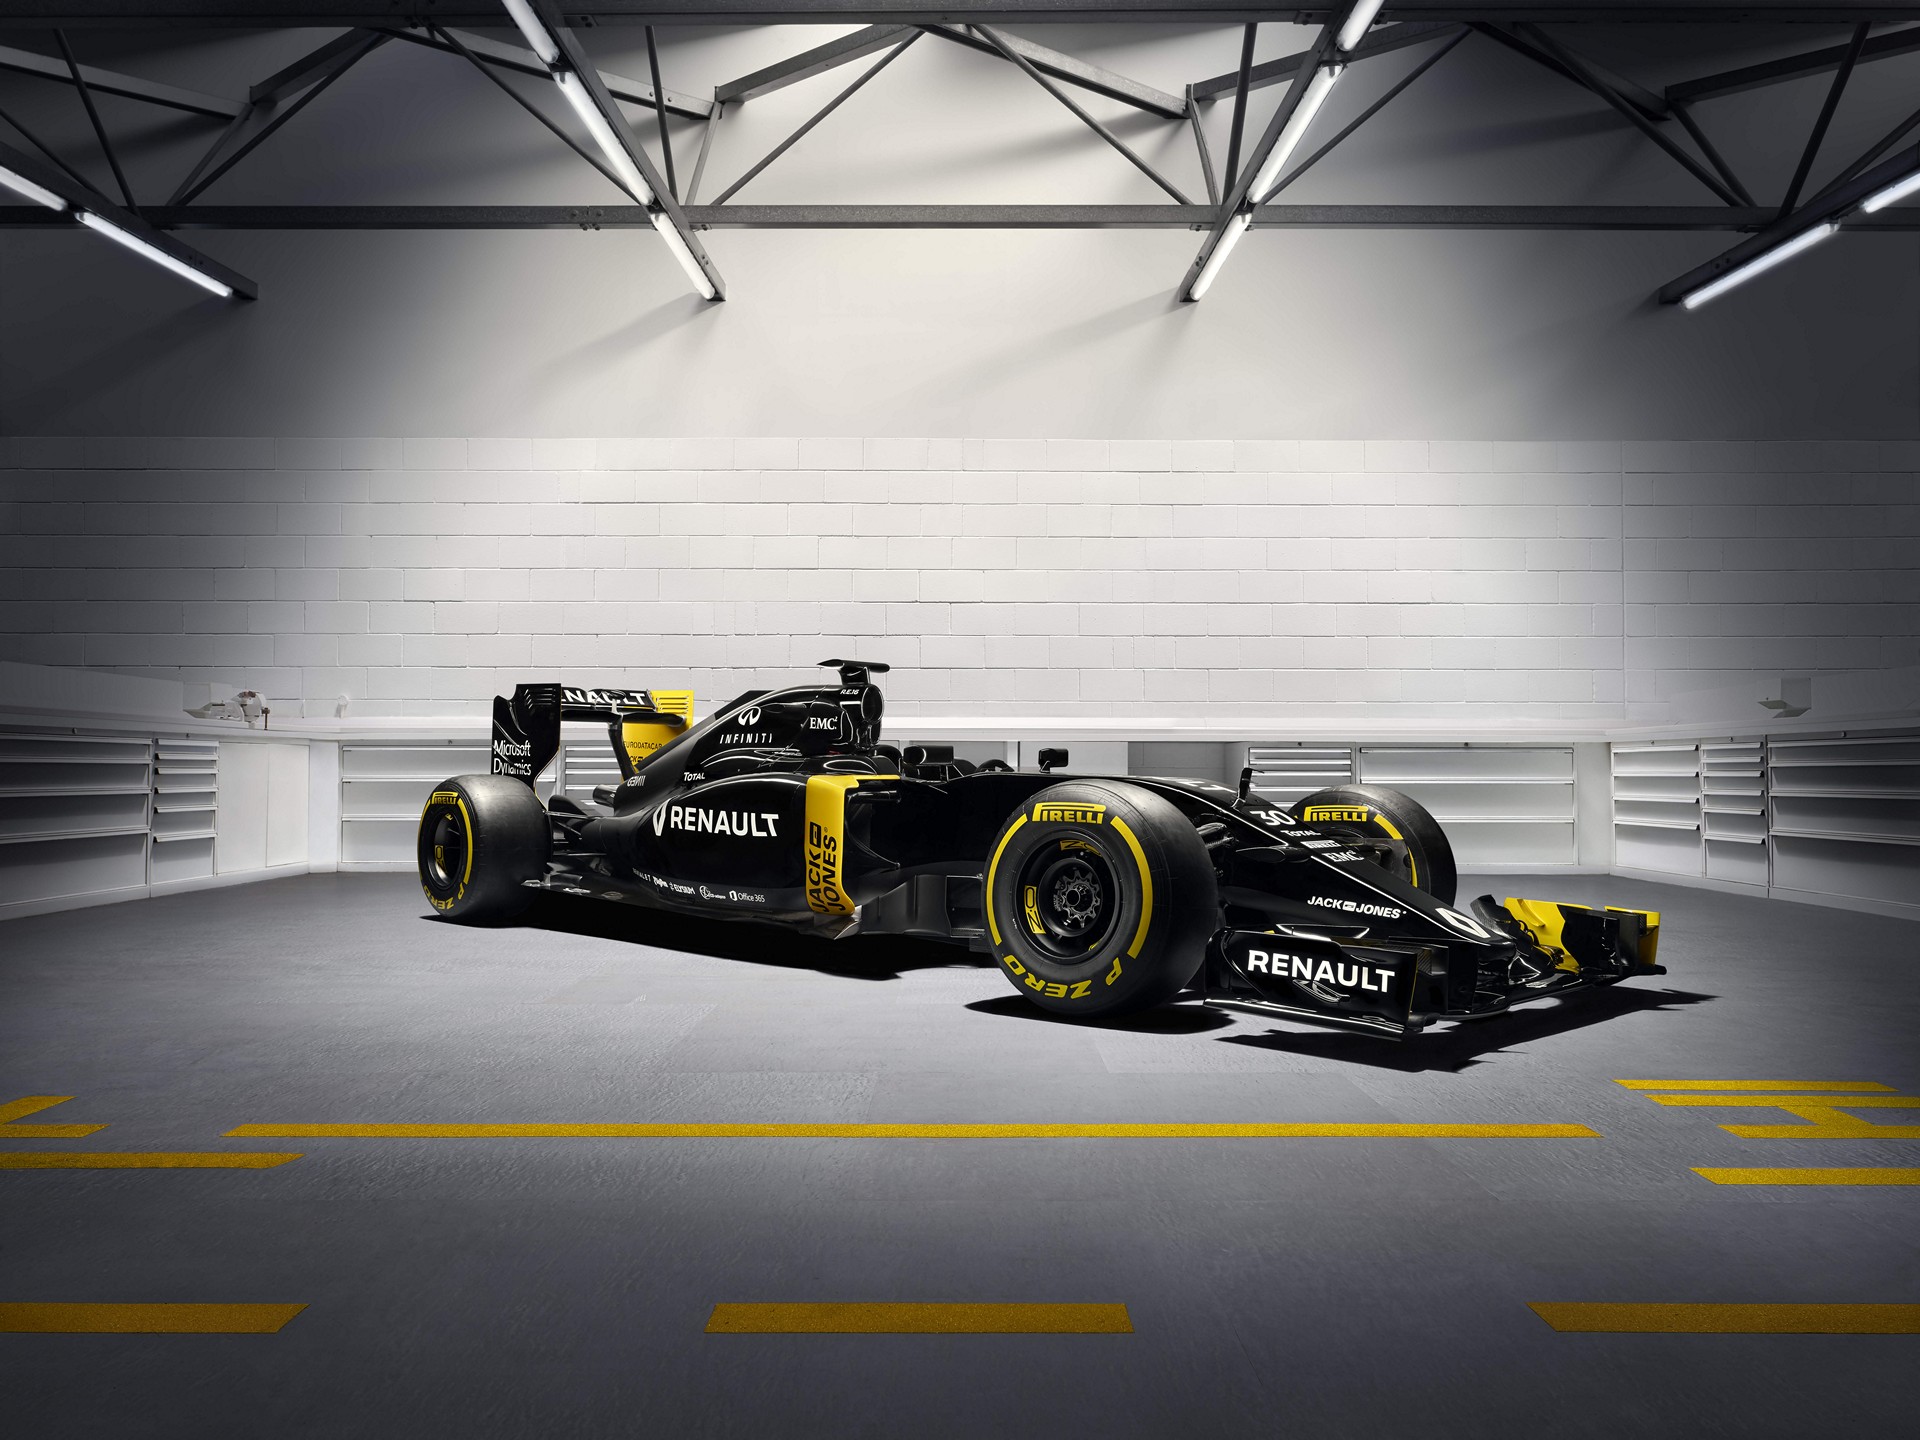 Infiniti’s successful involvement in Formula One enters the next phase. Starting with the new 2016 season, Infiniti will be a technical partner of the new Renault Sport Formula One team © Nissan Motor Co., Ltd.